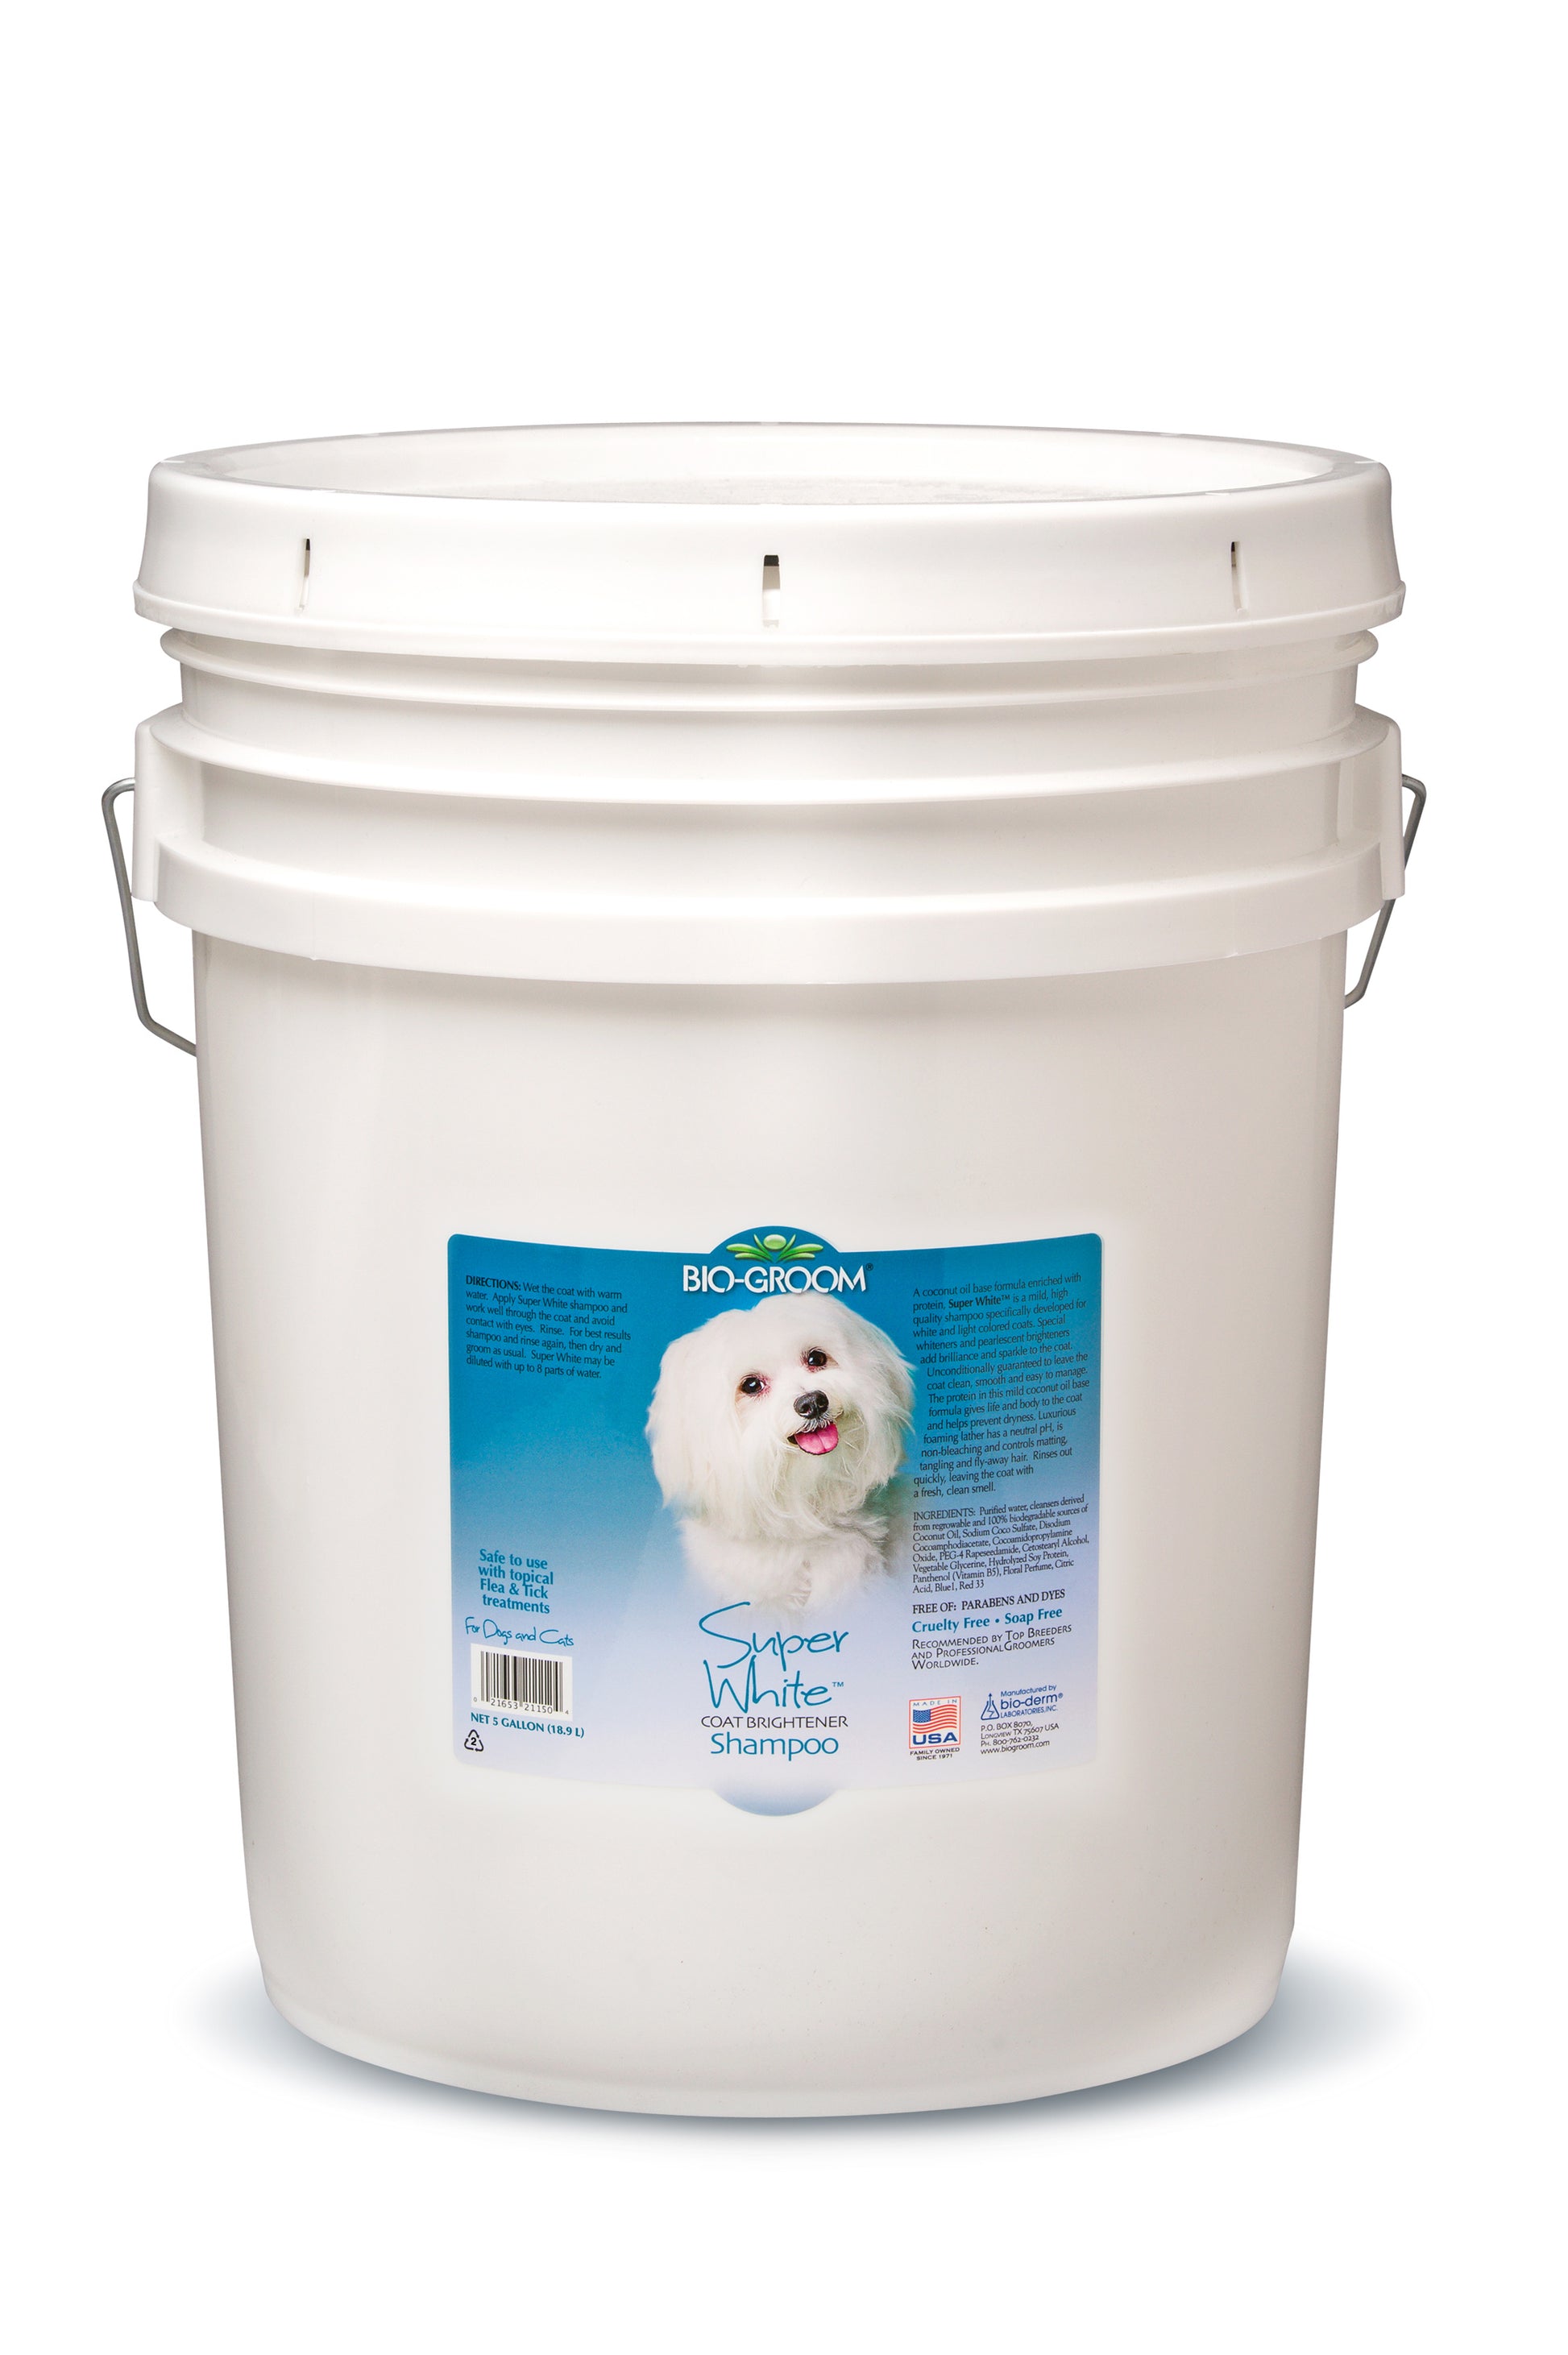 Bio-Groom Super White™ Coat Brightener Dog Shampoo is formulated for white and light-colored coats. Prevents dryness and provides strength and body  leaving it clean, smooth, and easy to manage. 100% biodegradable, free of parabens and dyes. 5 Gallon.